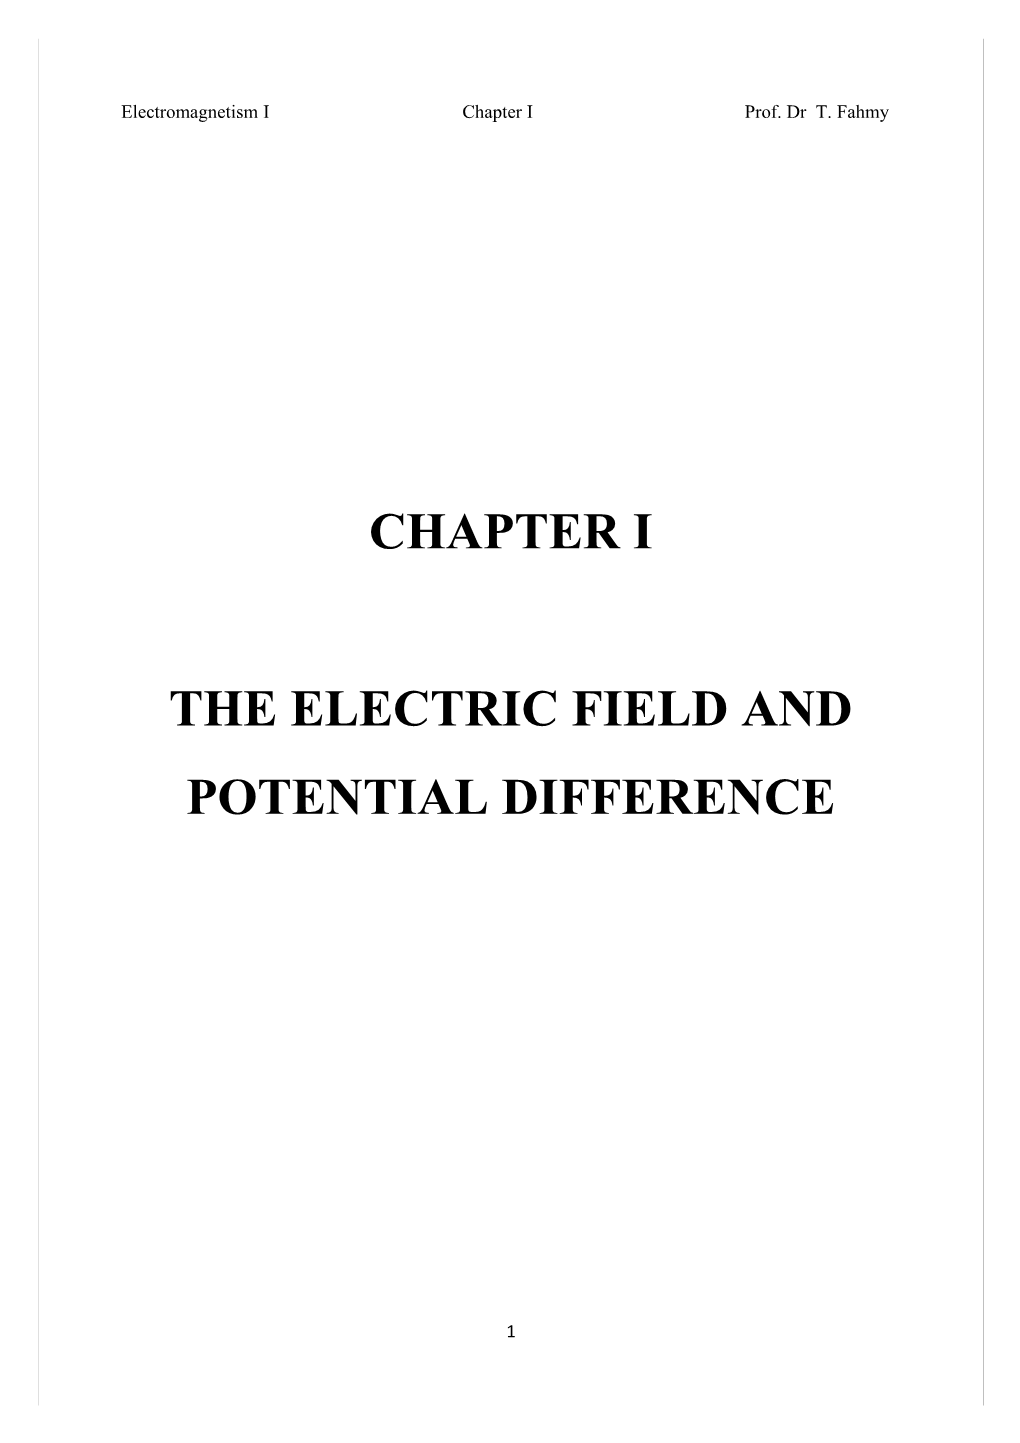 The Electric Field and Potential Difference